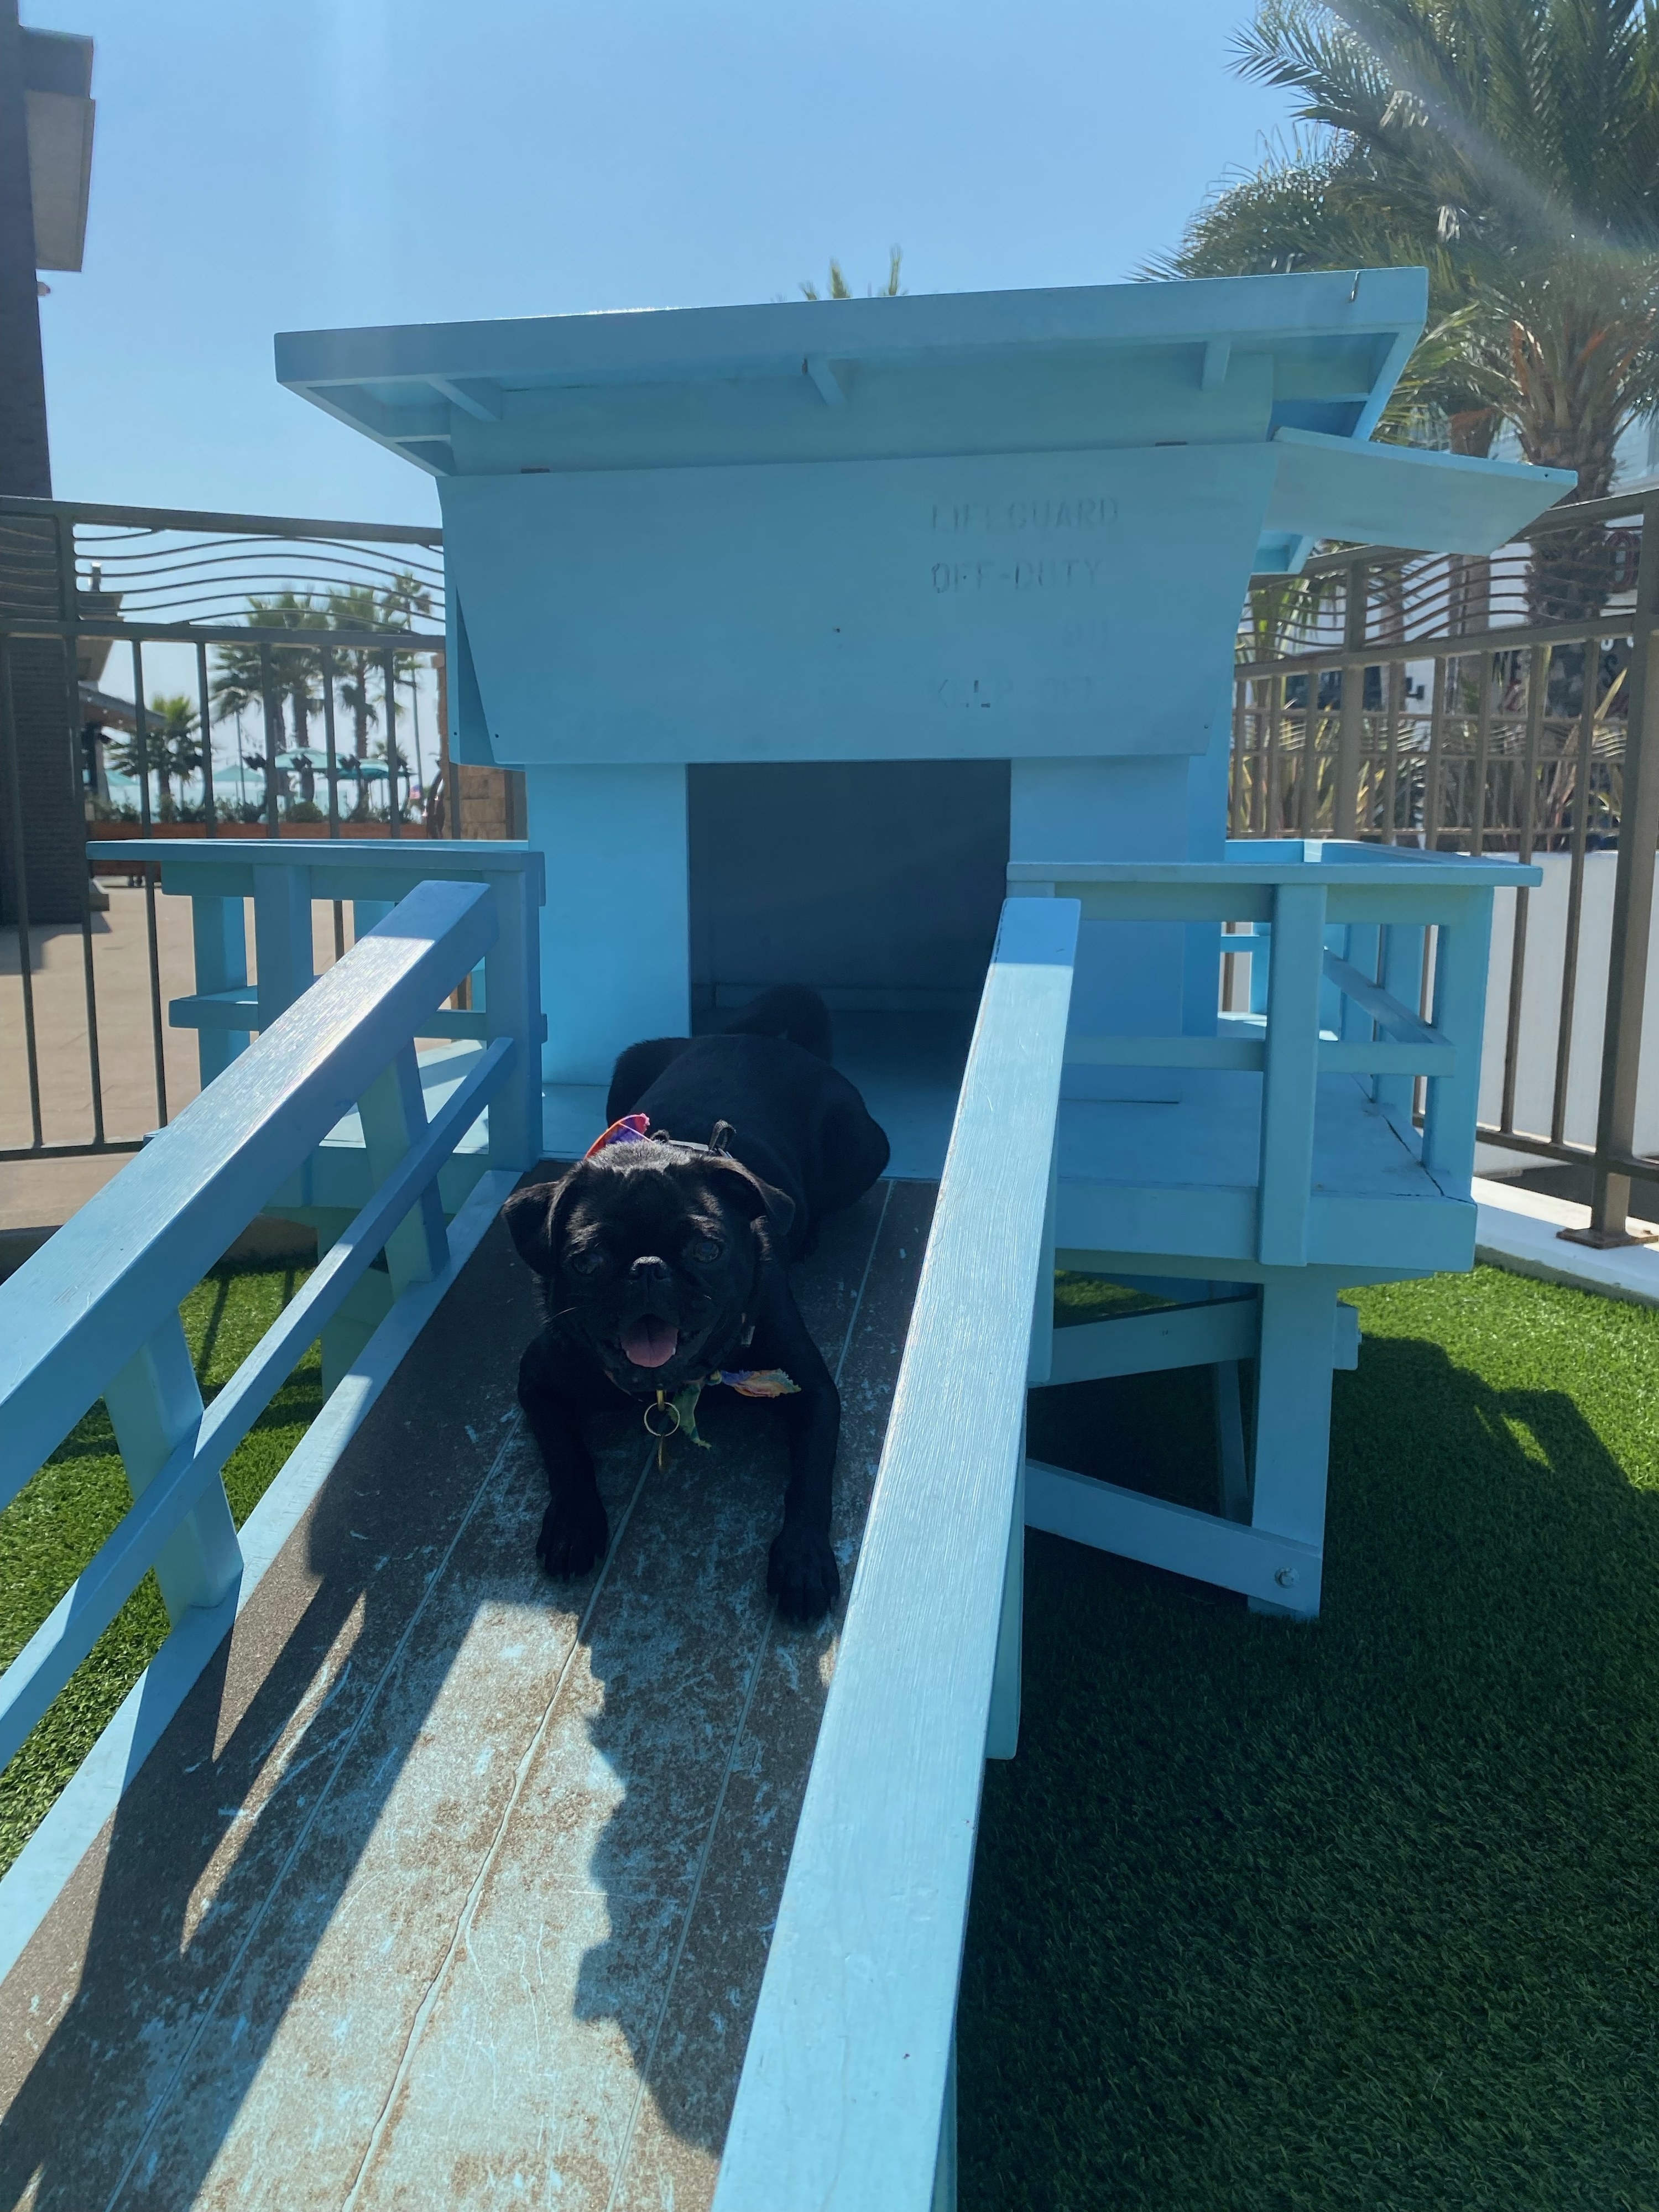 Phoebe lying down on the doggy lifeguard stand